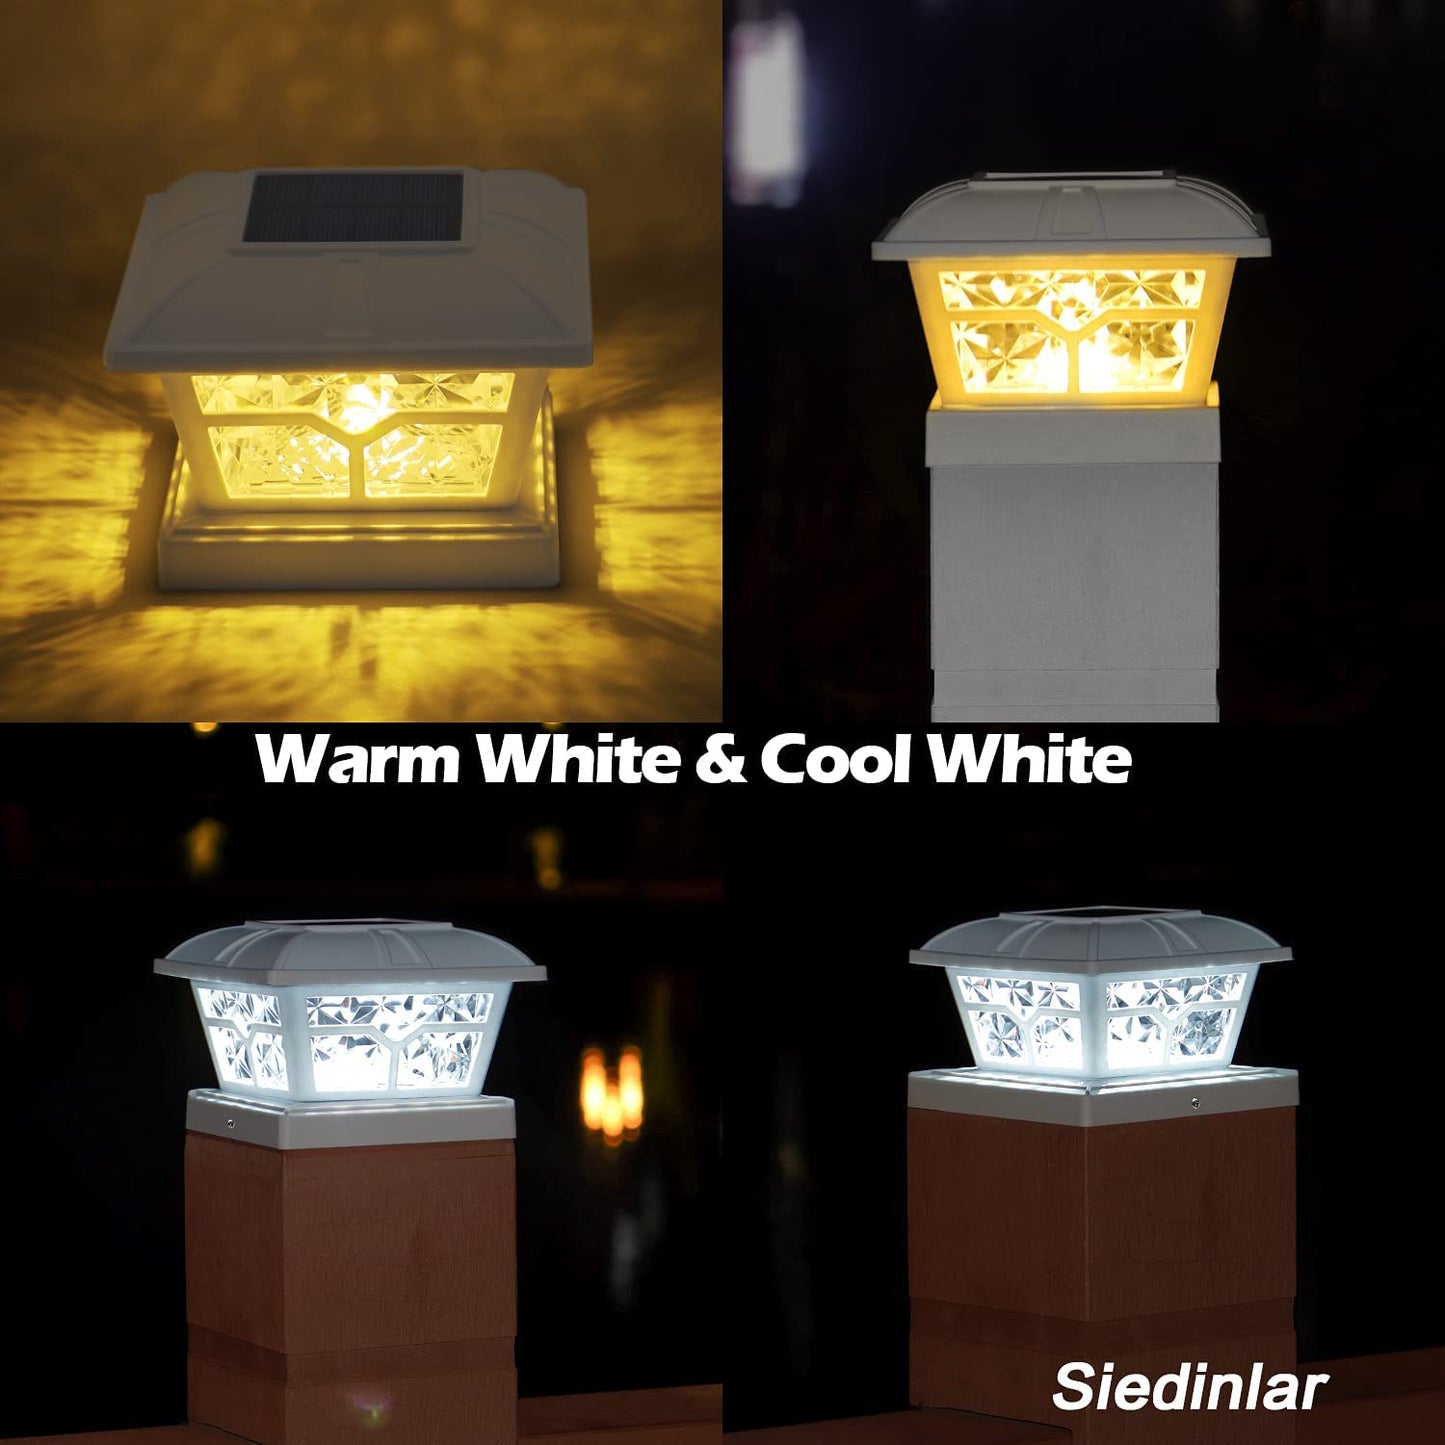 Siedinlar SD020 Solar Post Cap Lights Outdoor 2 Color Modes 8 LEDs for 4x4 5x5 6x6 Posts Fence Deck Patio Decoration Warm White & Cool White Lighting White